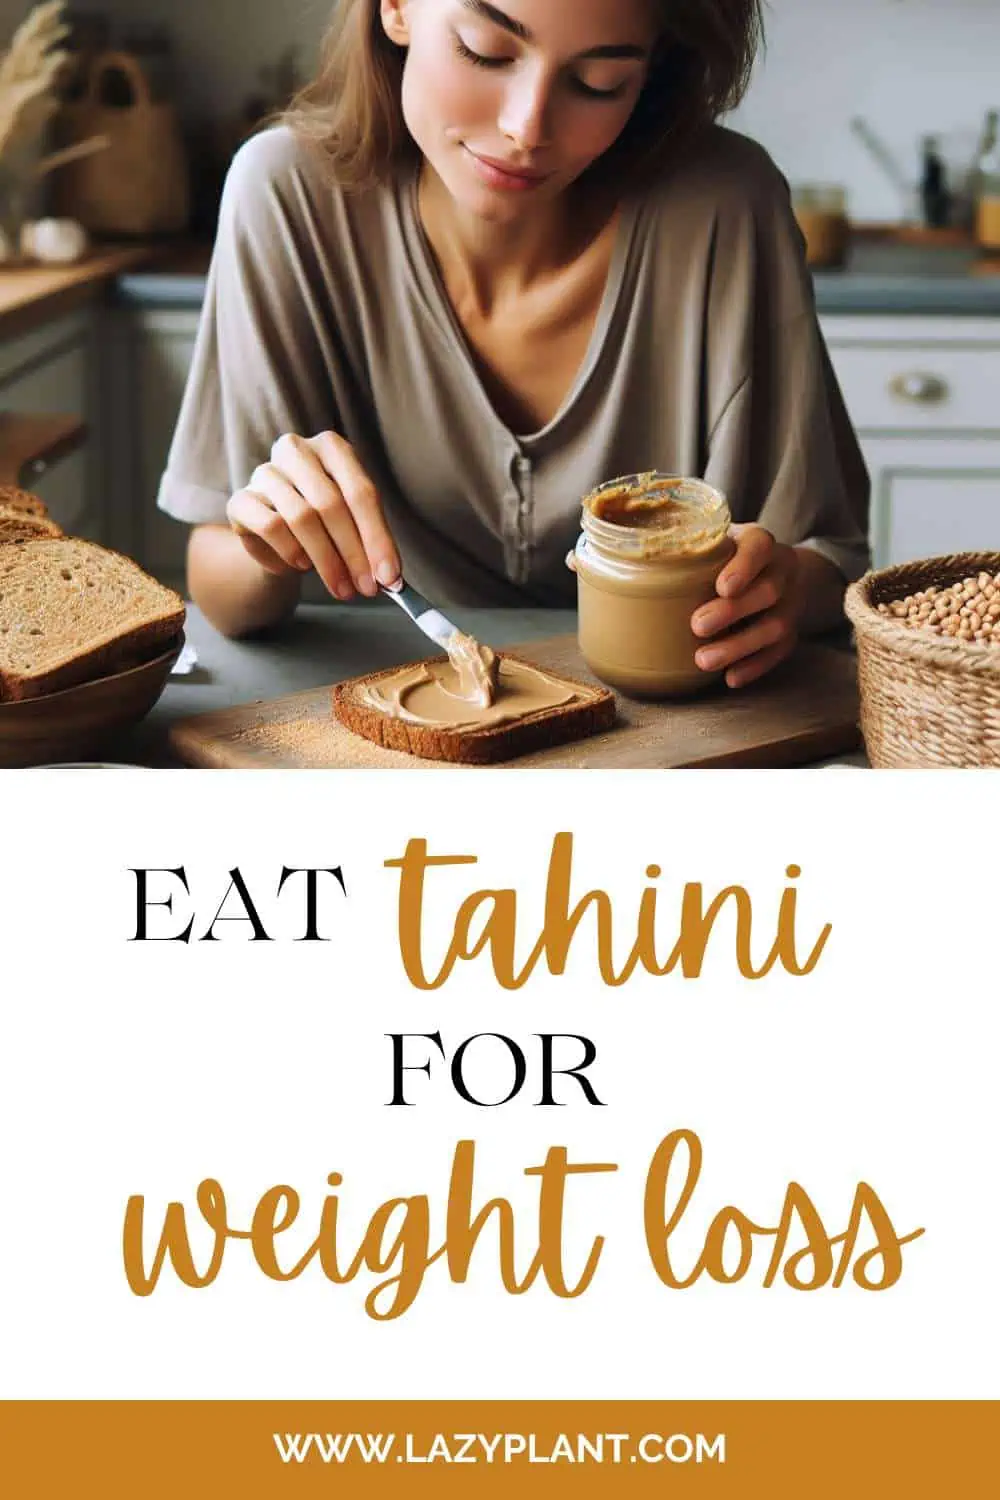 1–2 tablespoons of tahini a day support weight loss.